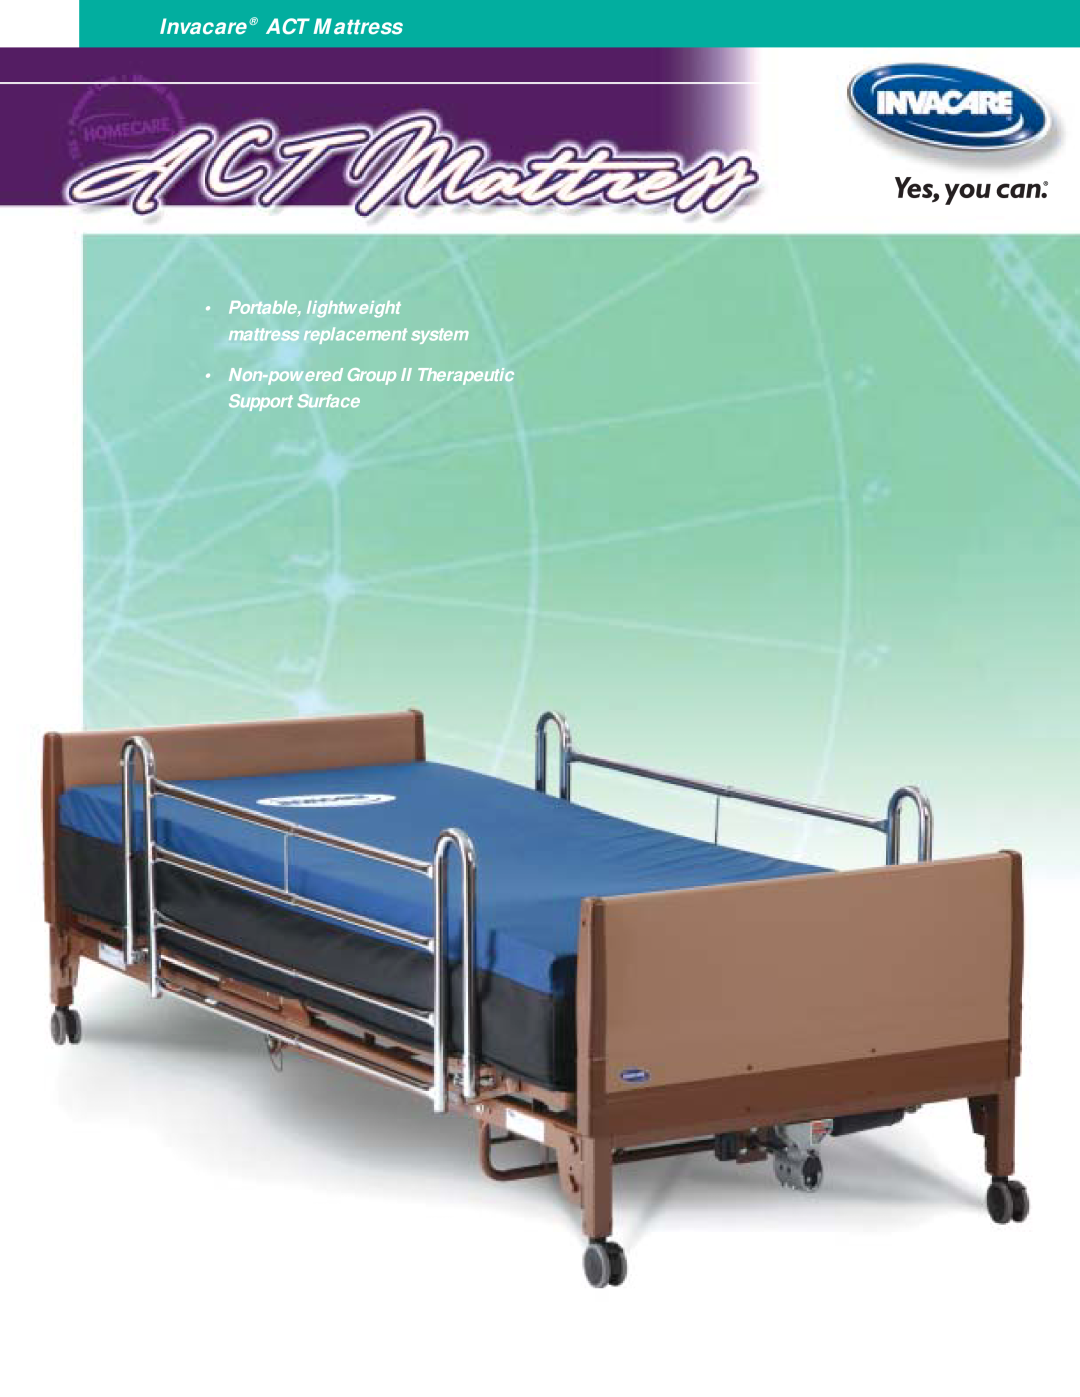 Invacare manual Invacare ACT Mattress, Non-powered Group II Therapeutic Support Surface 